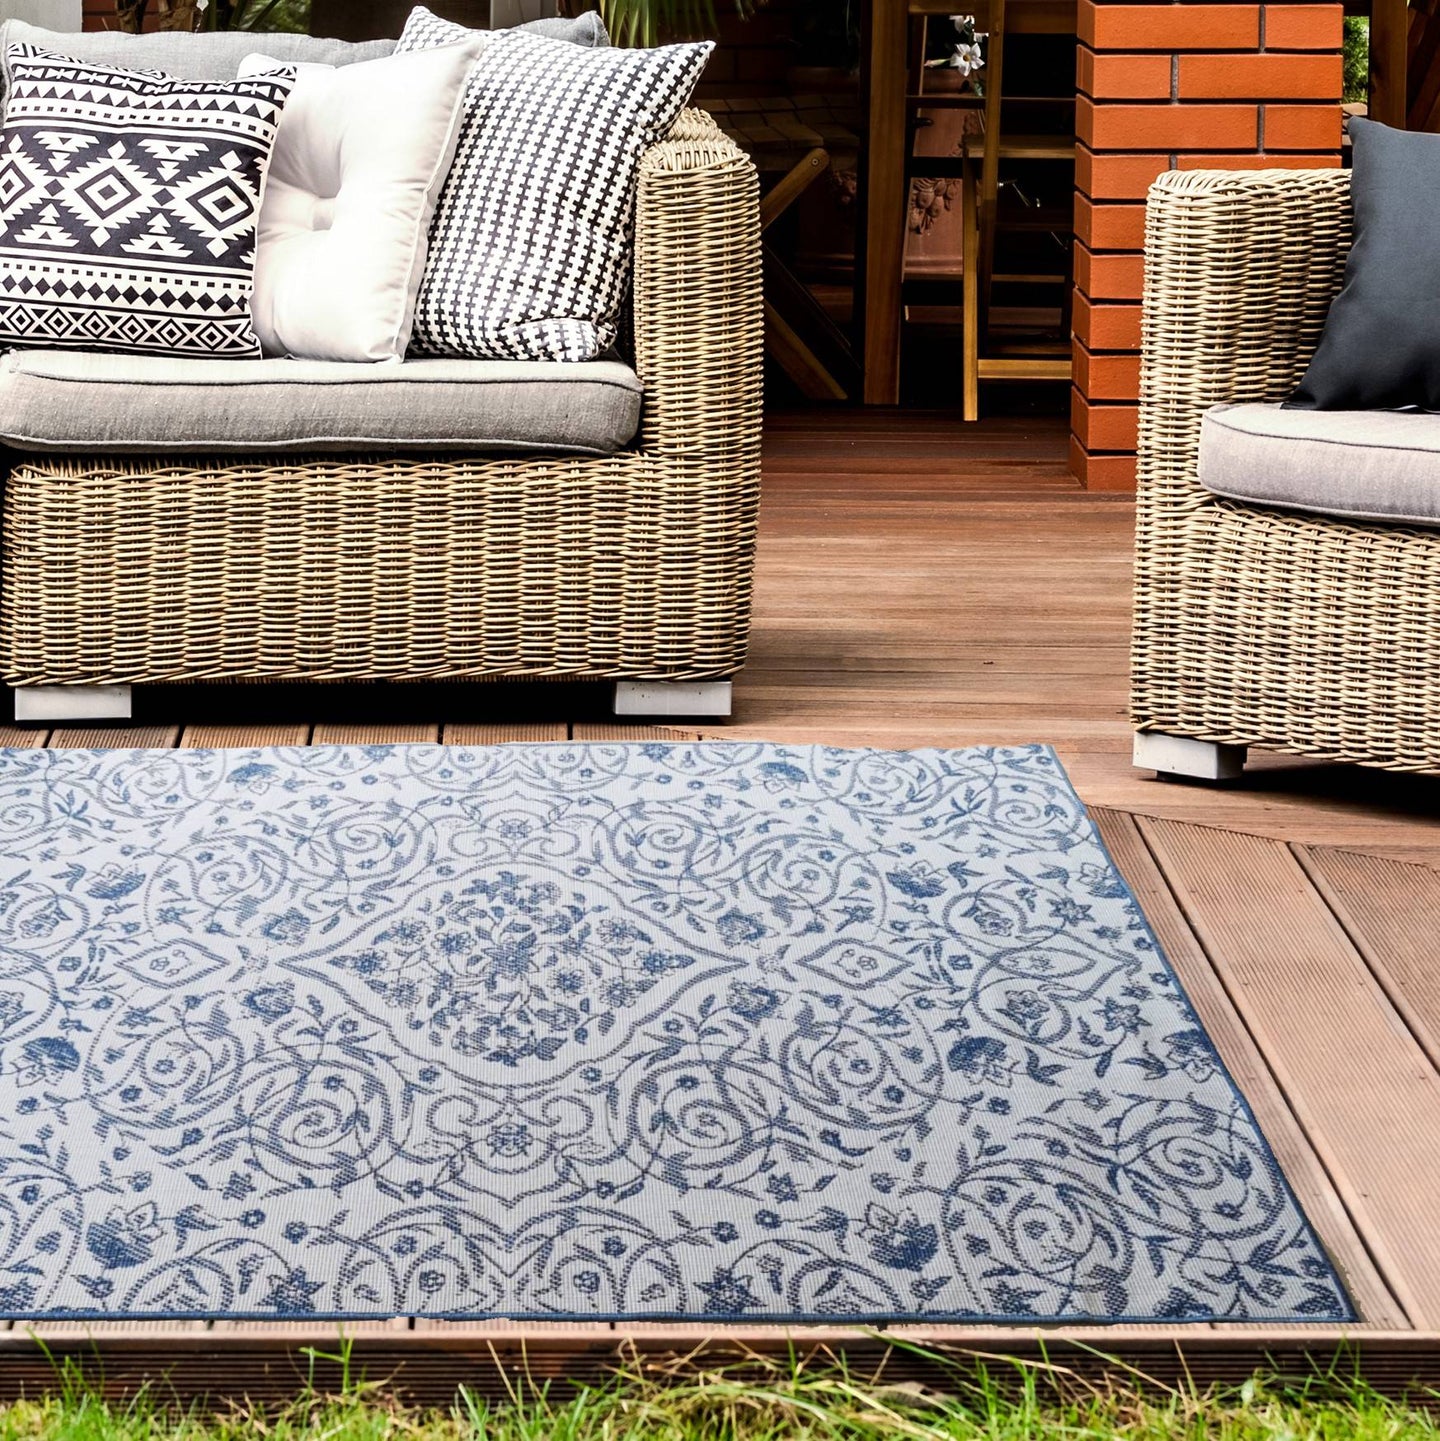 Blue and White Reversible Floral Outdoor Rug - Capri